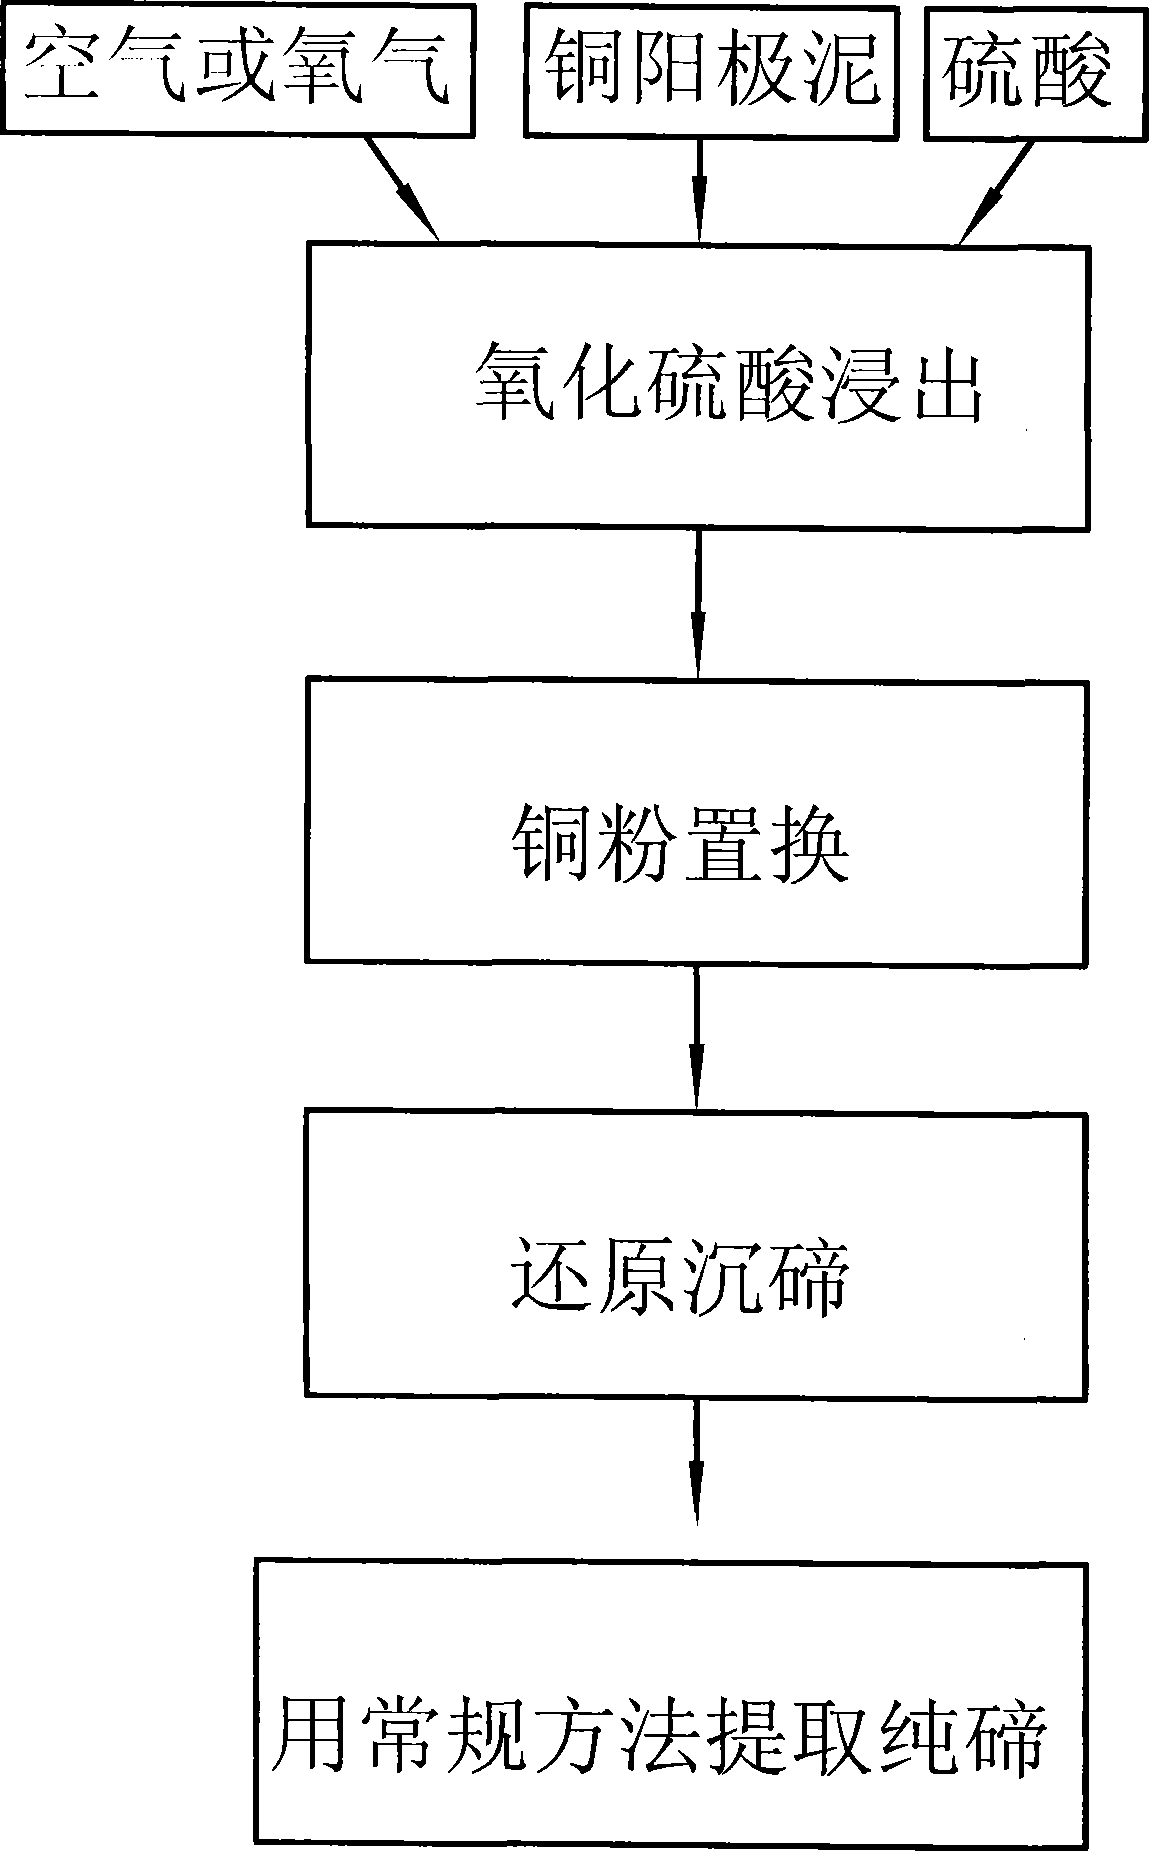 Process for extracting tellurium from copper anode mud